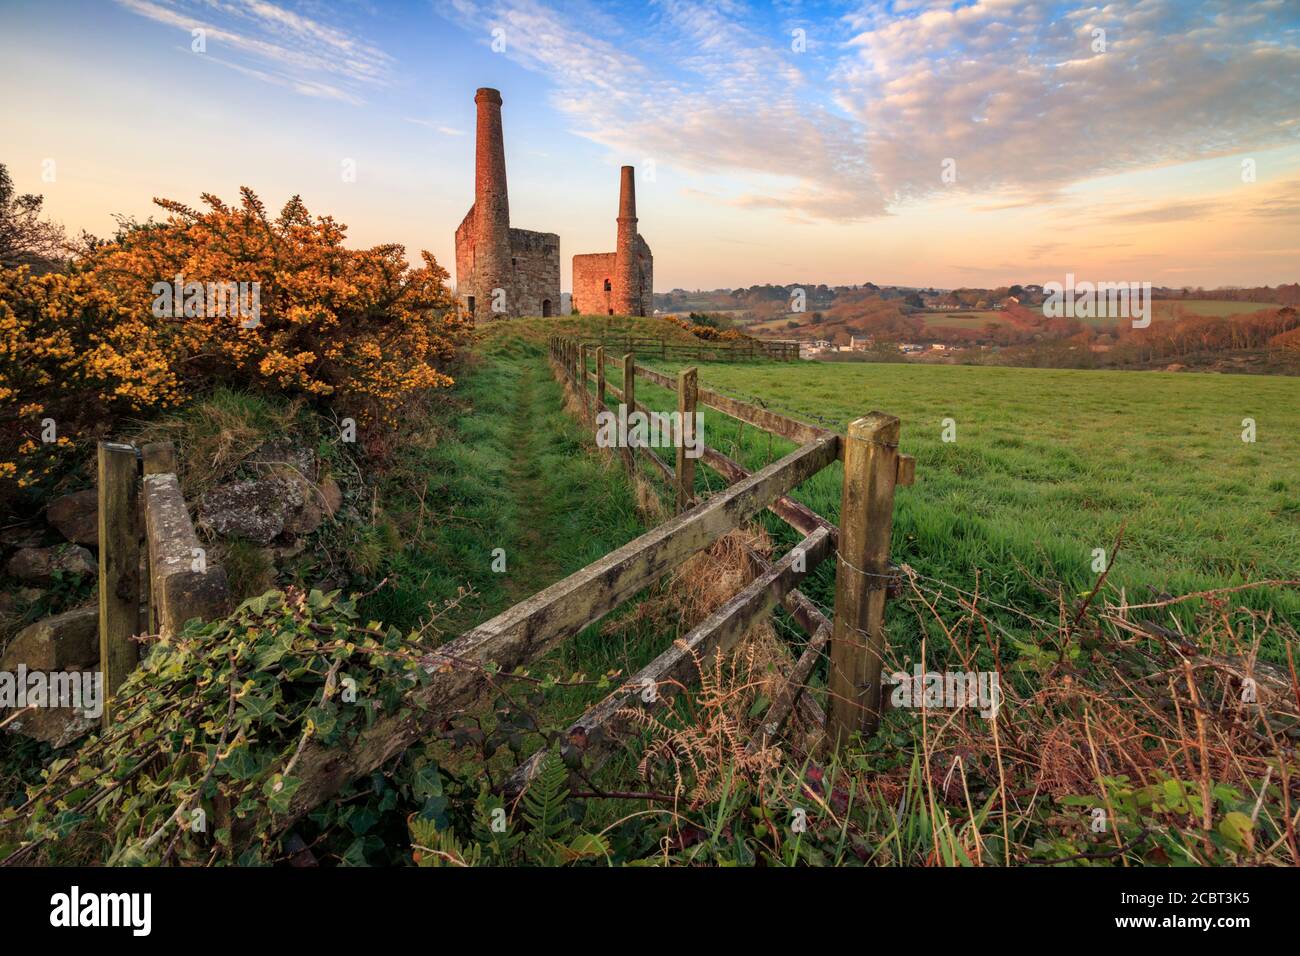 Wheal Unity Wood Engine Houses at Wheal Bush in Cornwall captured at sunrise from the entrance to the former industrial site. Stock Photo